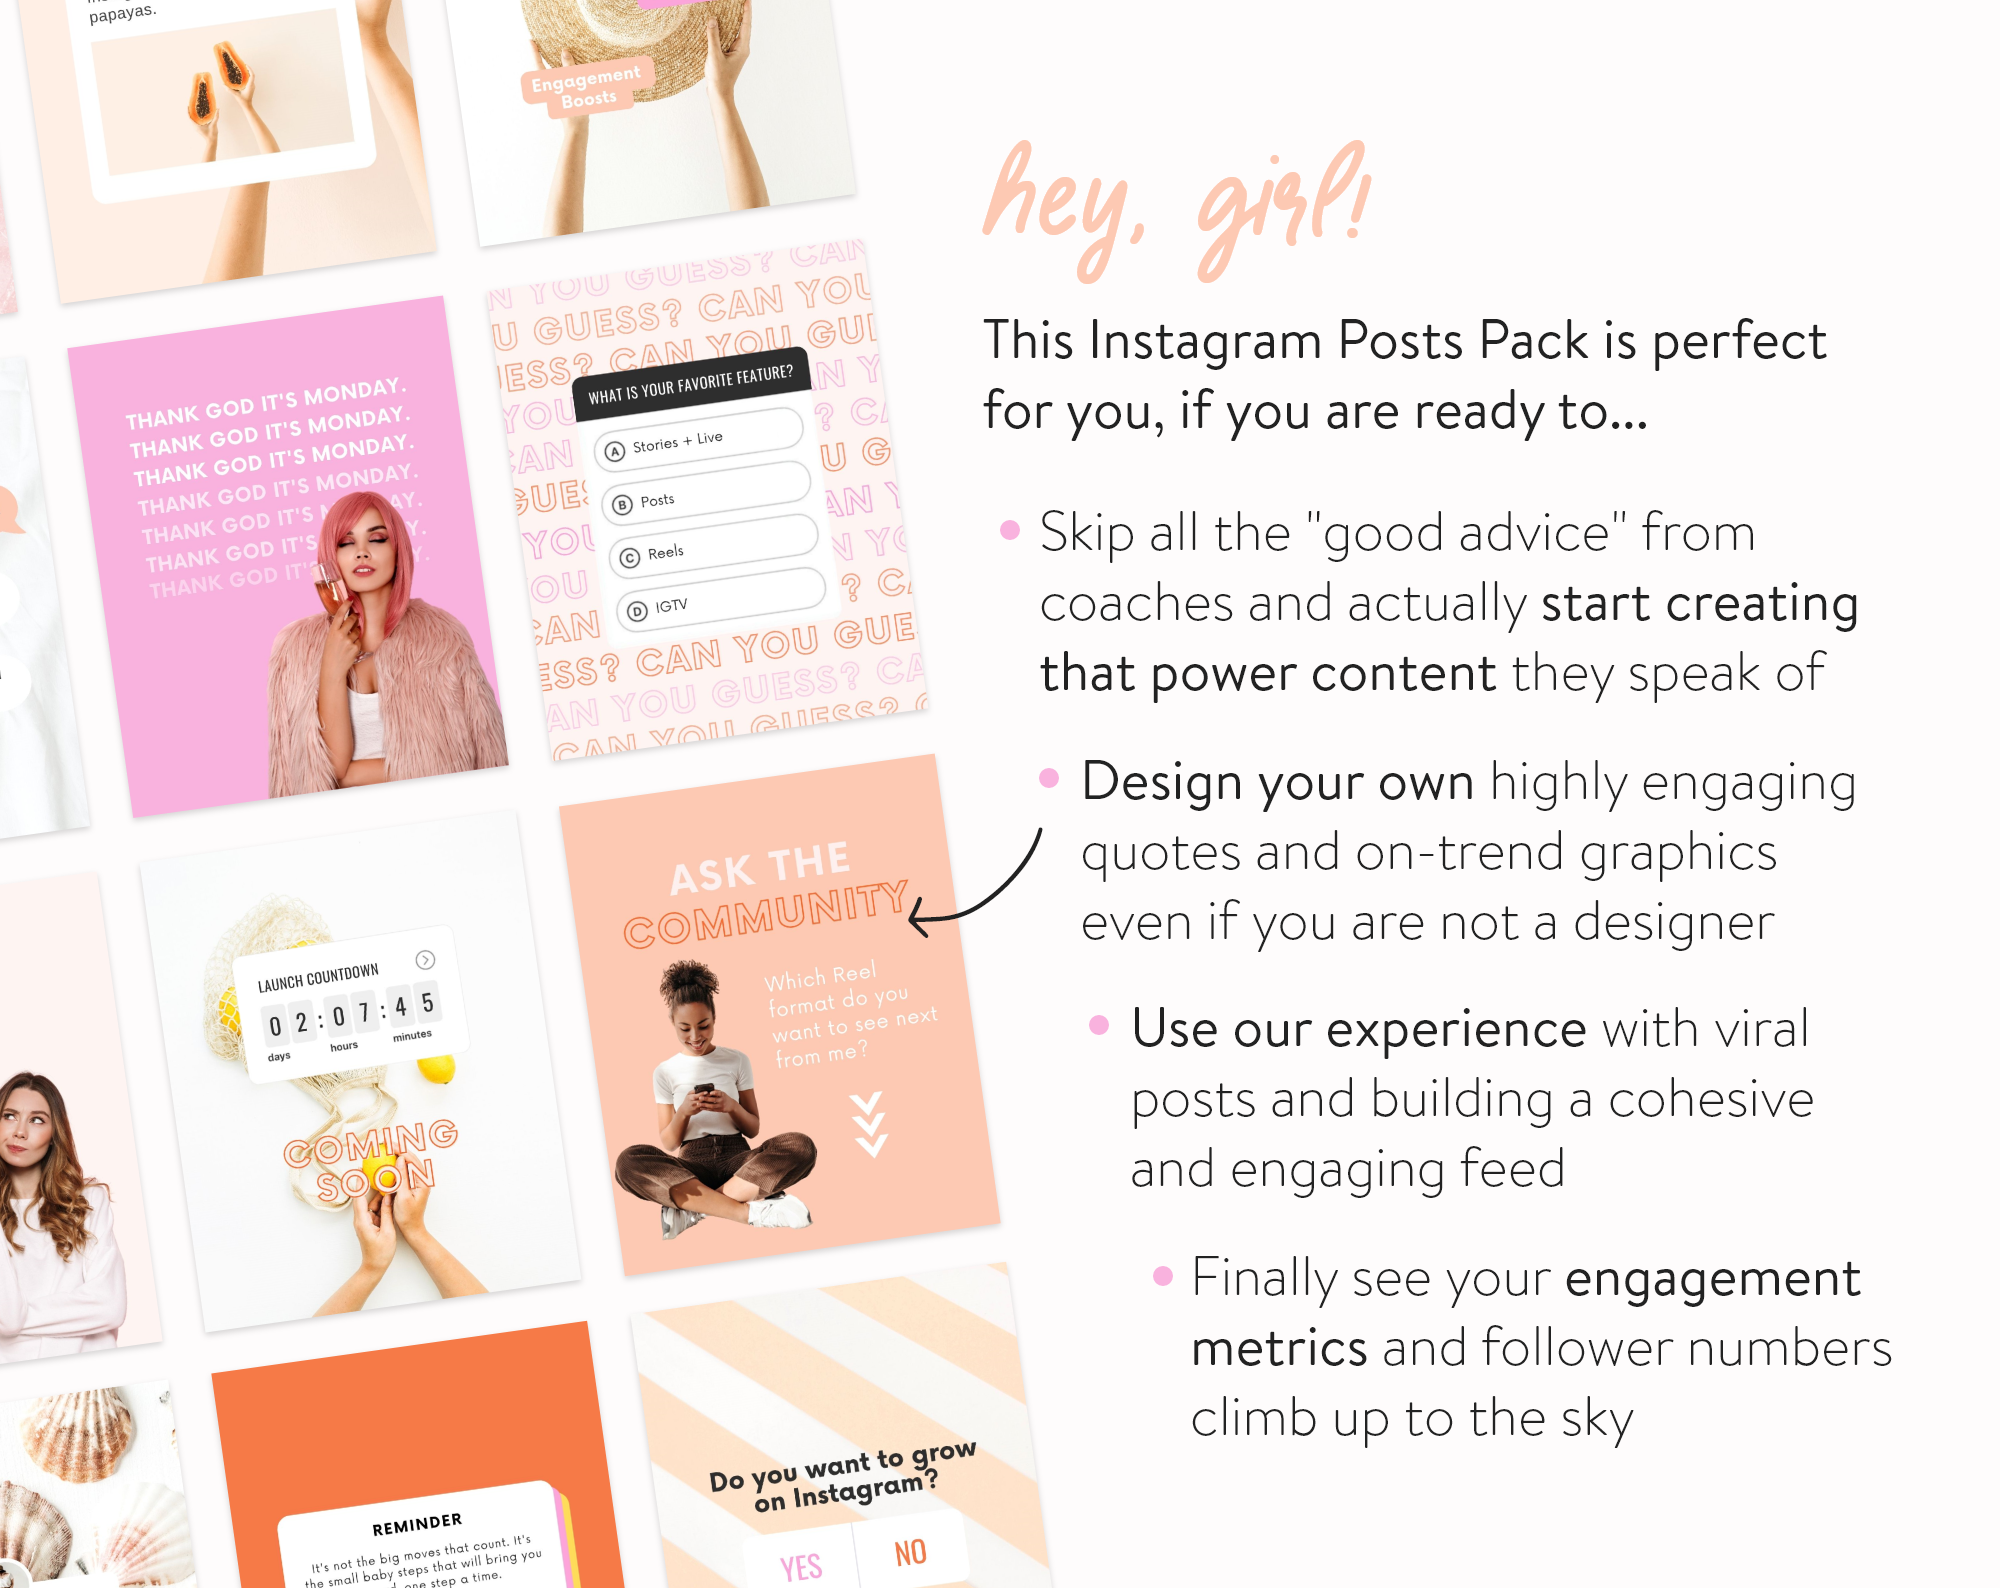 Instagram-Engagement-power-posts-pack-for-canva-this-if-for-you-8